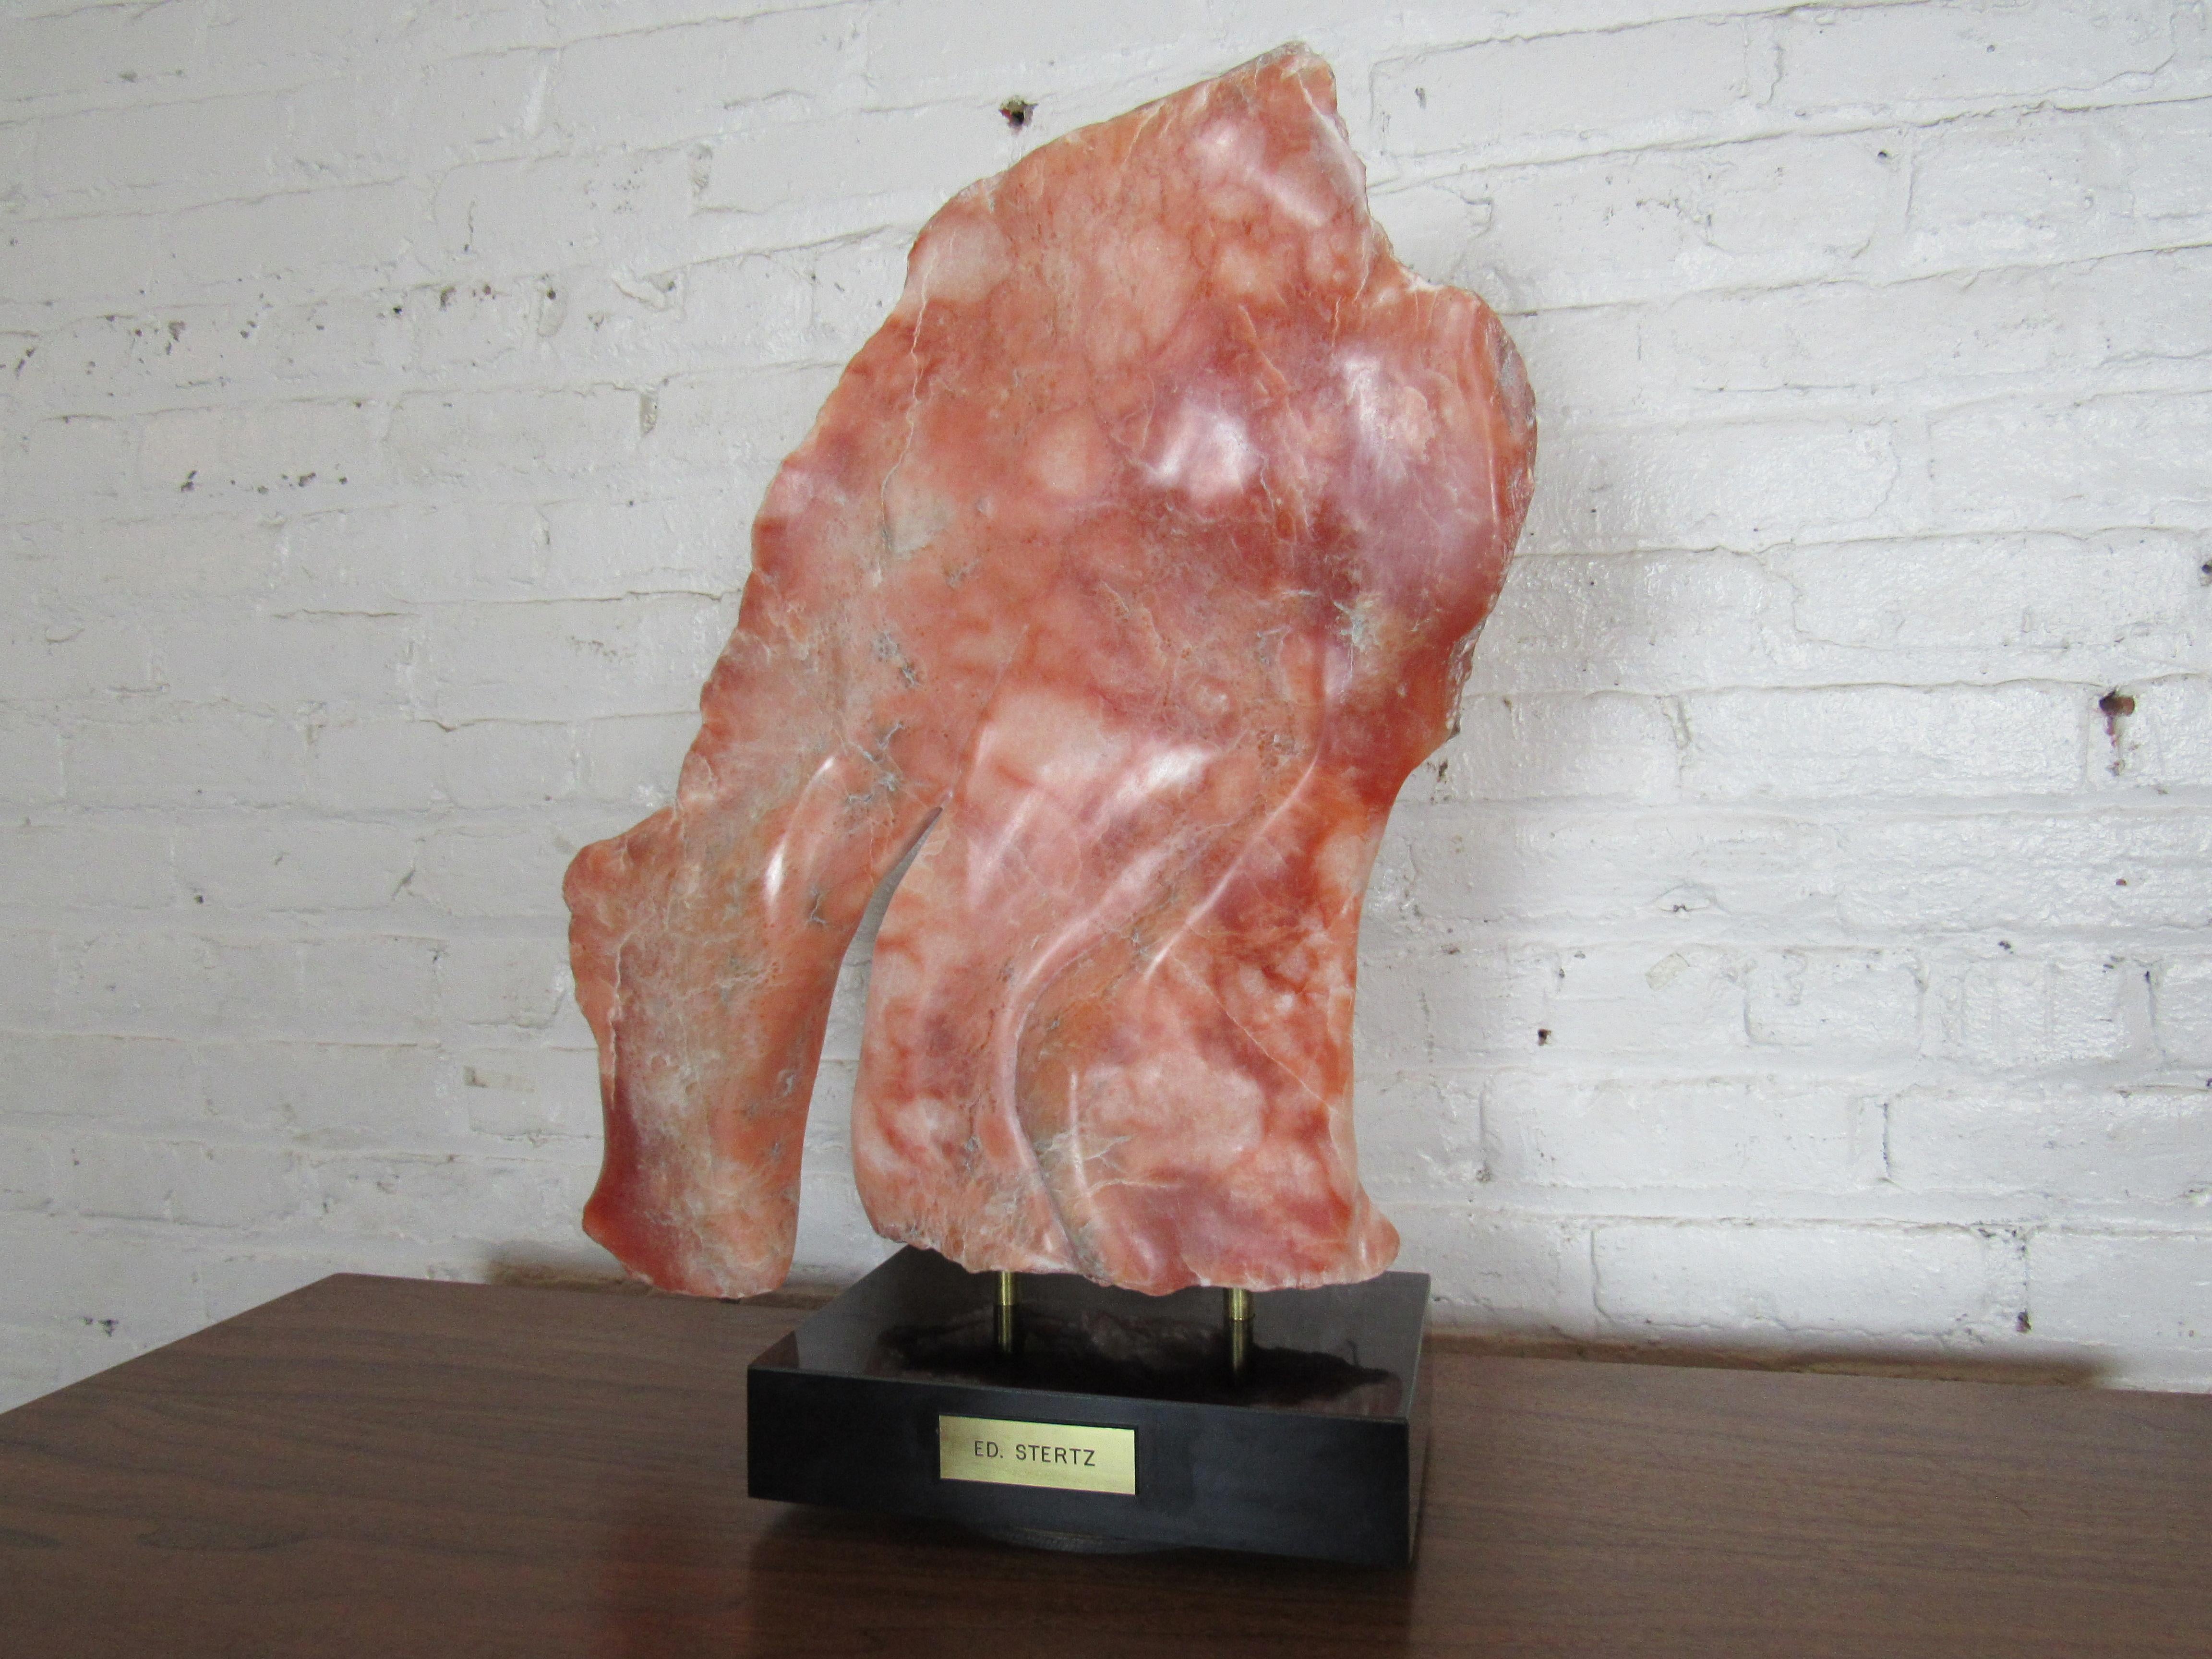 An interesting stone sculpture that is mounted to a swiveling base. The marble's unique form and naturally salmon pink color make for an eye-catching decoration in any room. Please confirm item location with seller (NY/NJ).